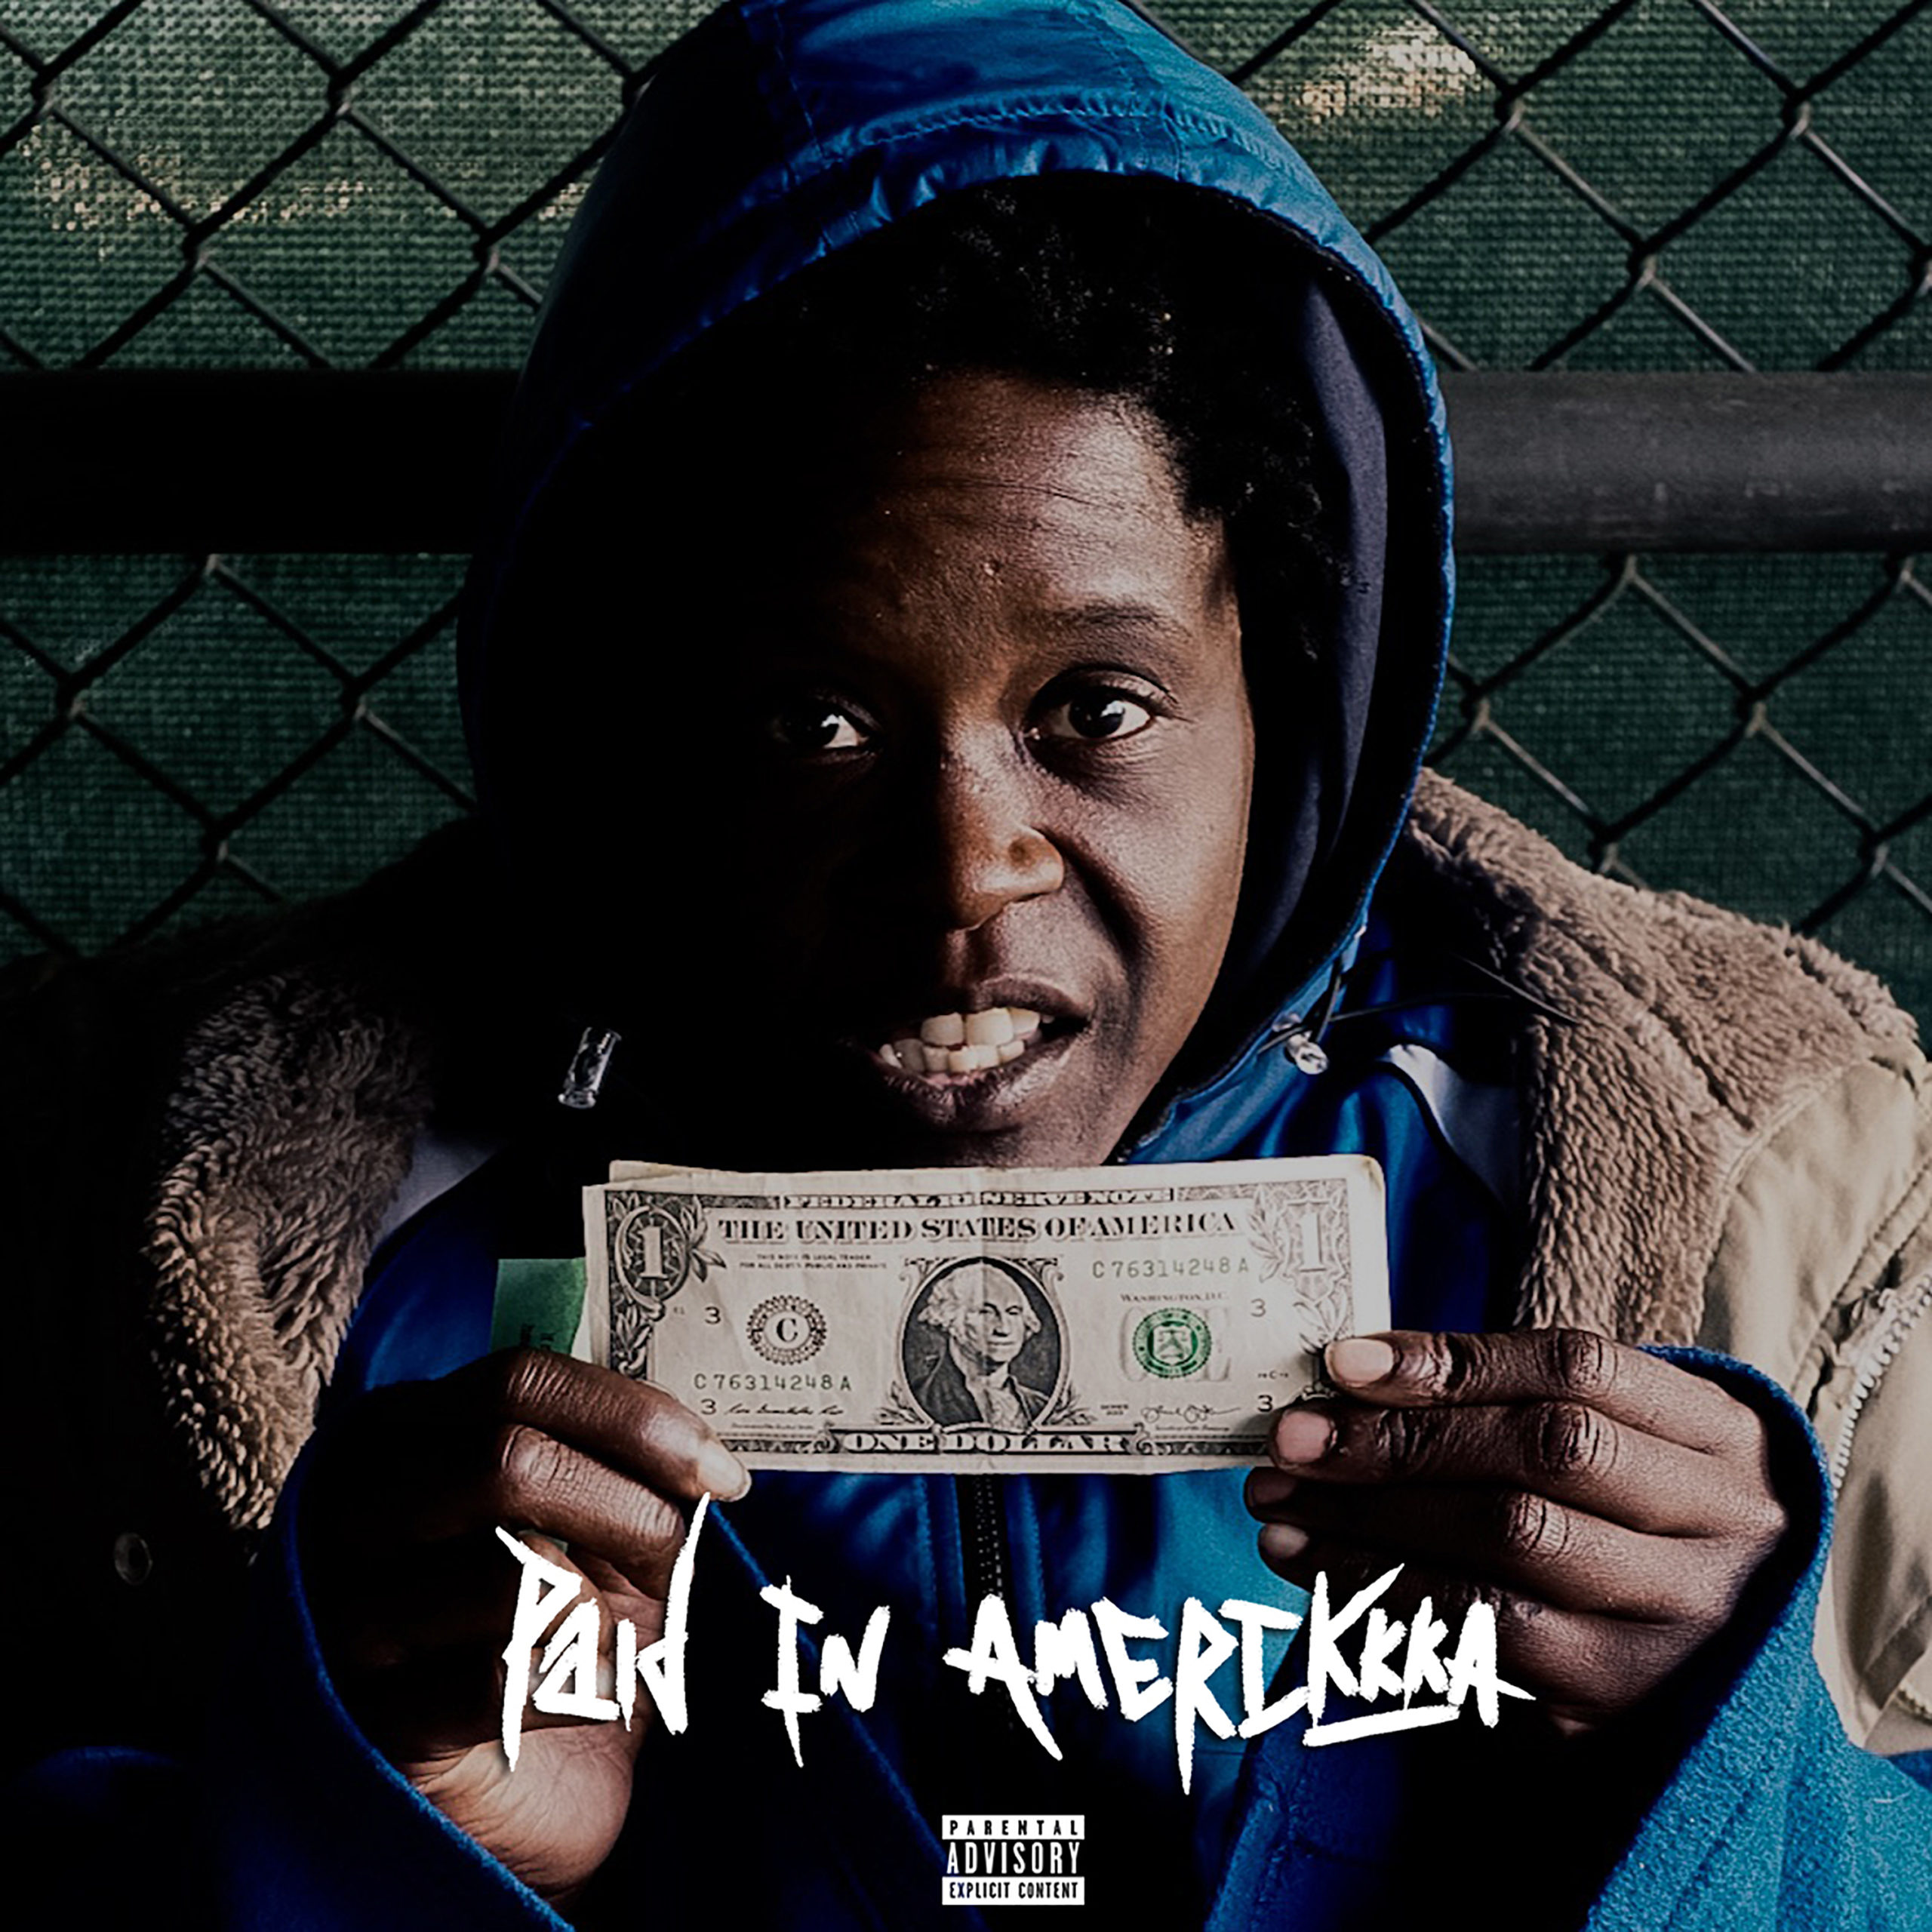 Paid In AmeriKKKa Serves Up ‘No Free Lunch’ EP